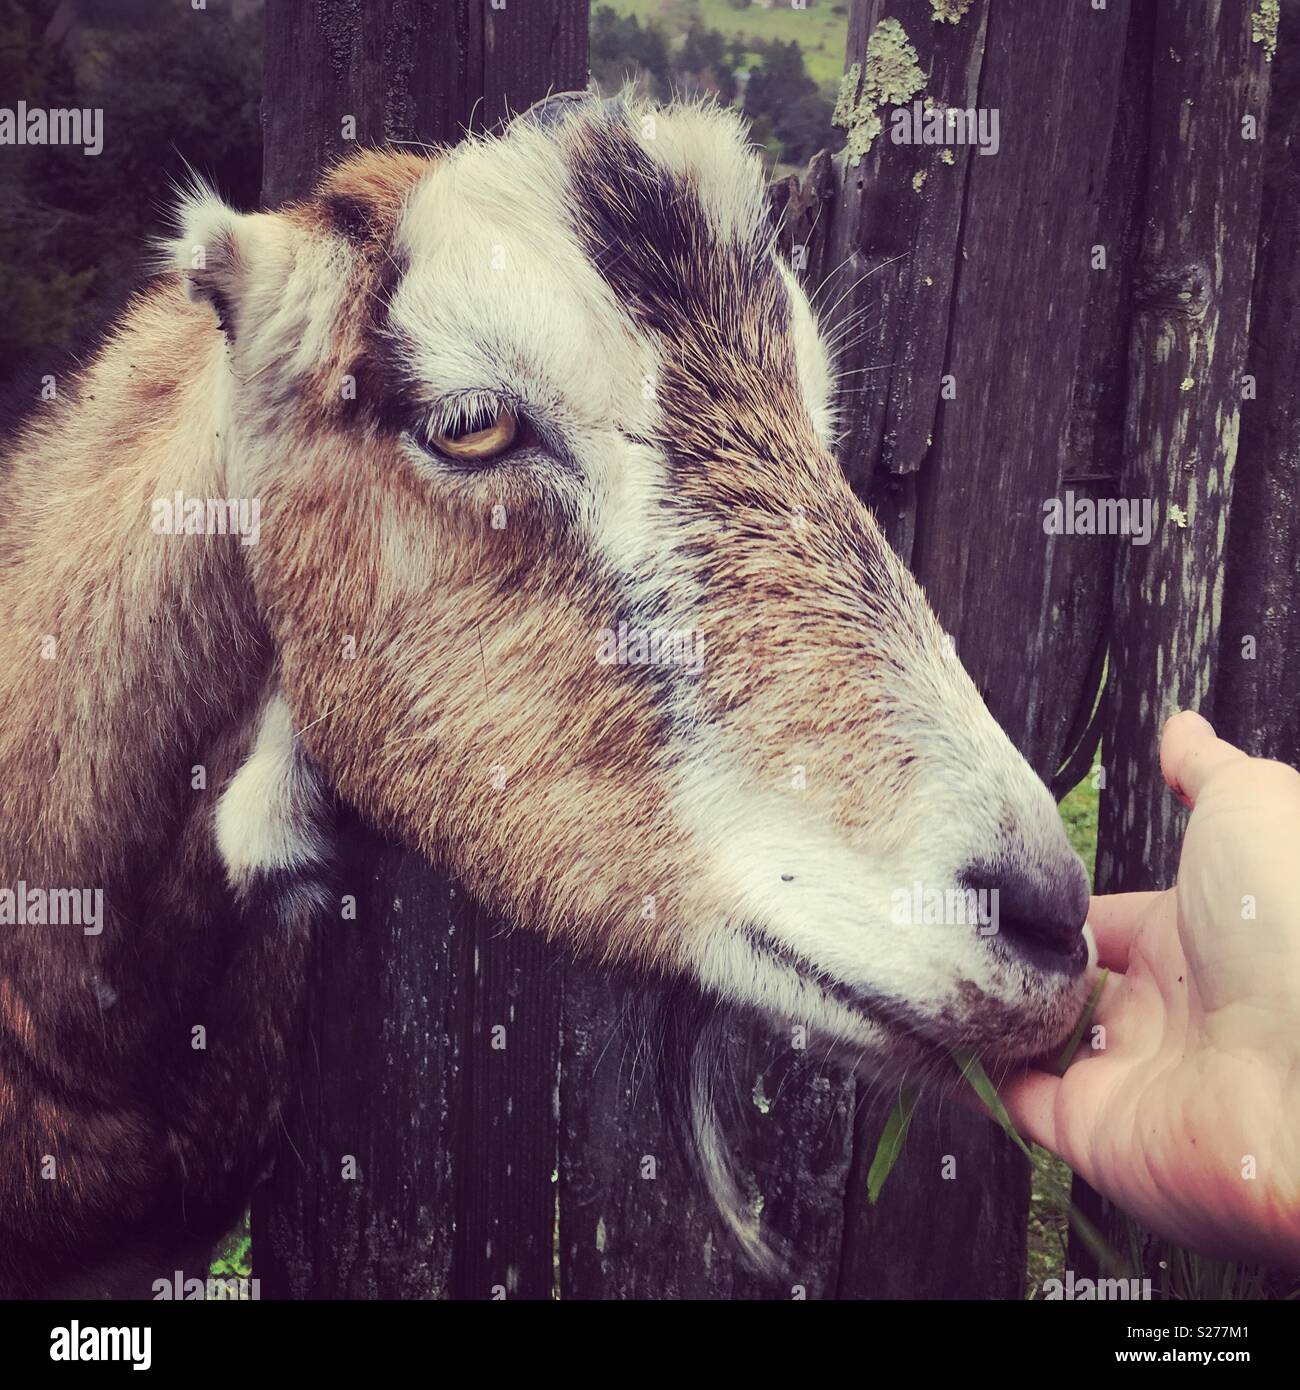 A goat eating from a person’a hand. Stock Photo